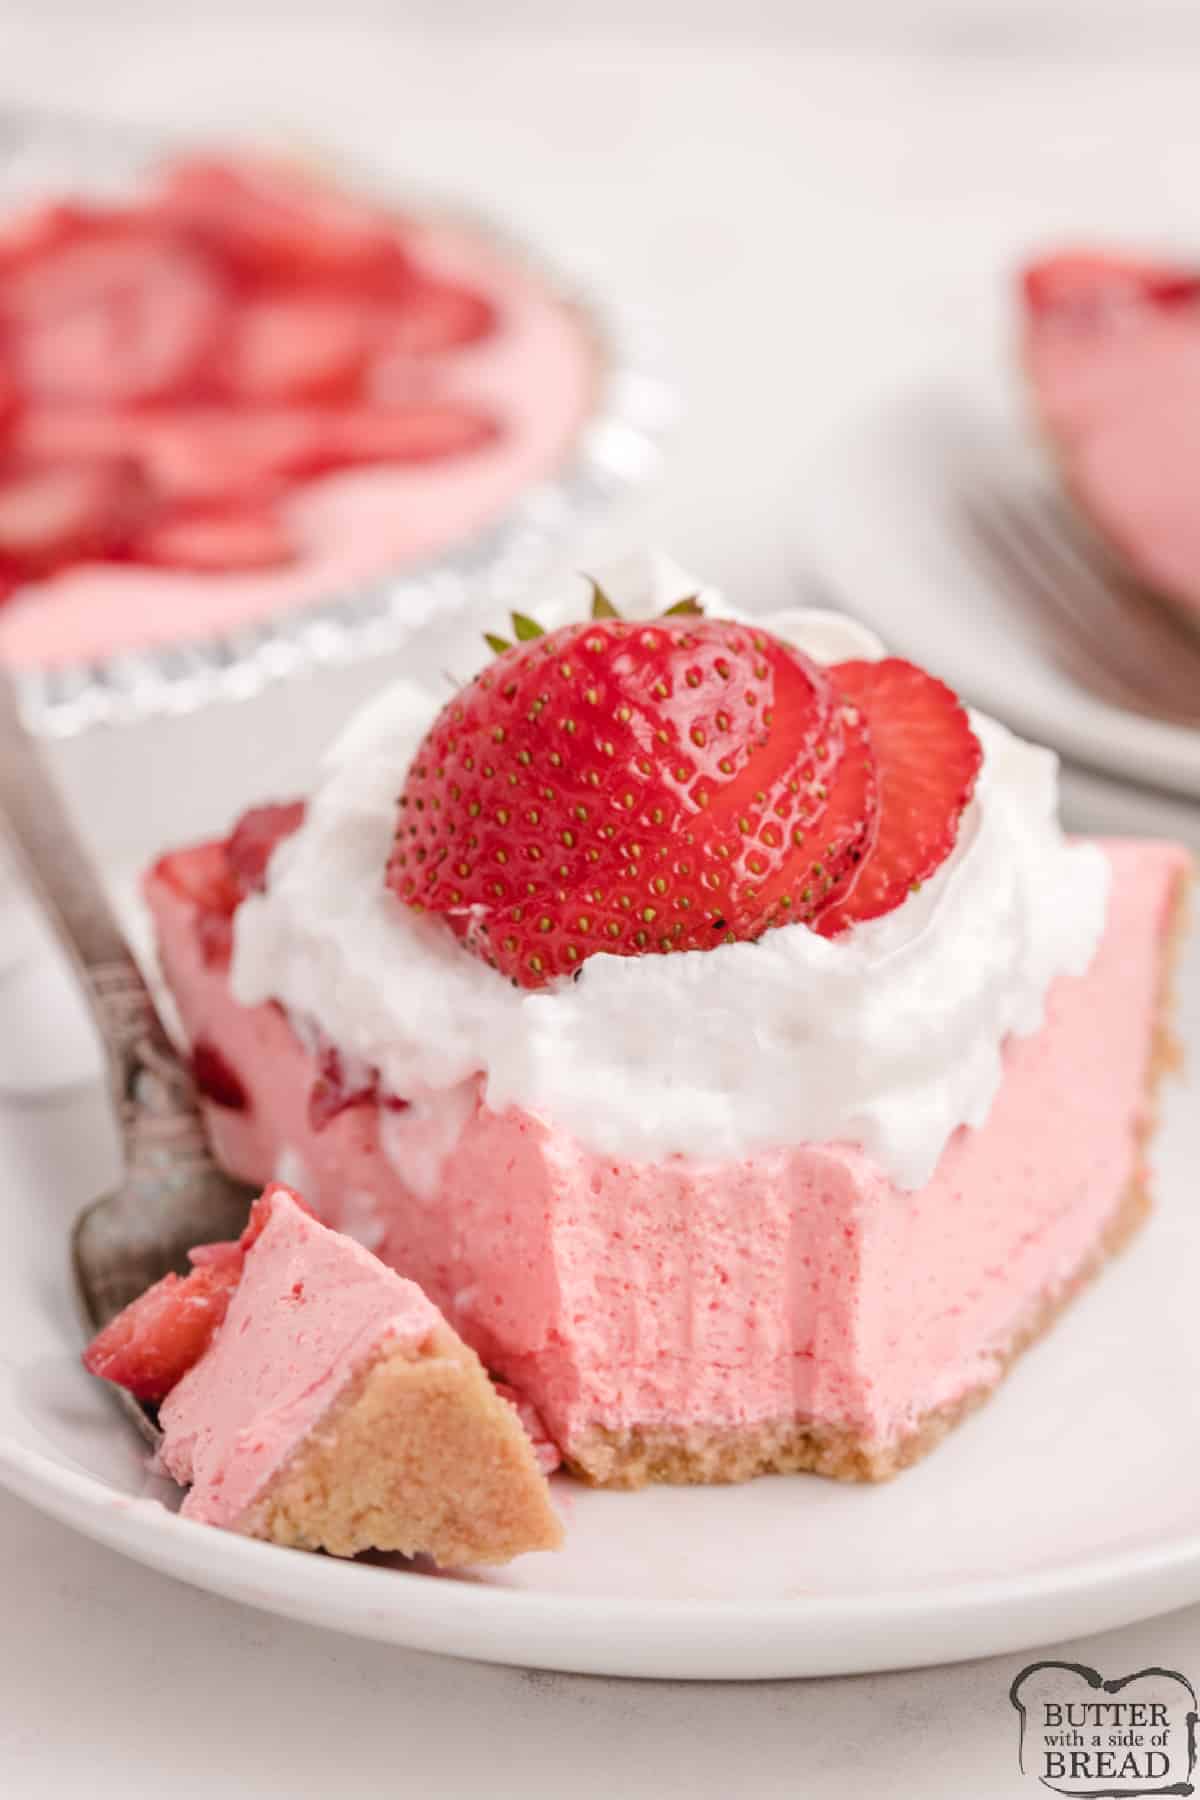 No-Bake Strawberry Jello Pie is an easy no-bake dessert made with only 5 ingredients. This refreshing strawberry dessert recipe couldn't be any easier to make! 